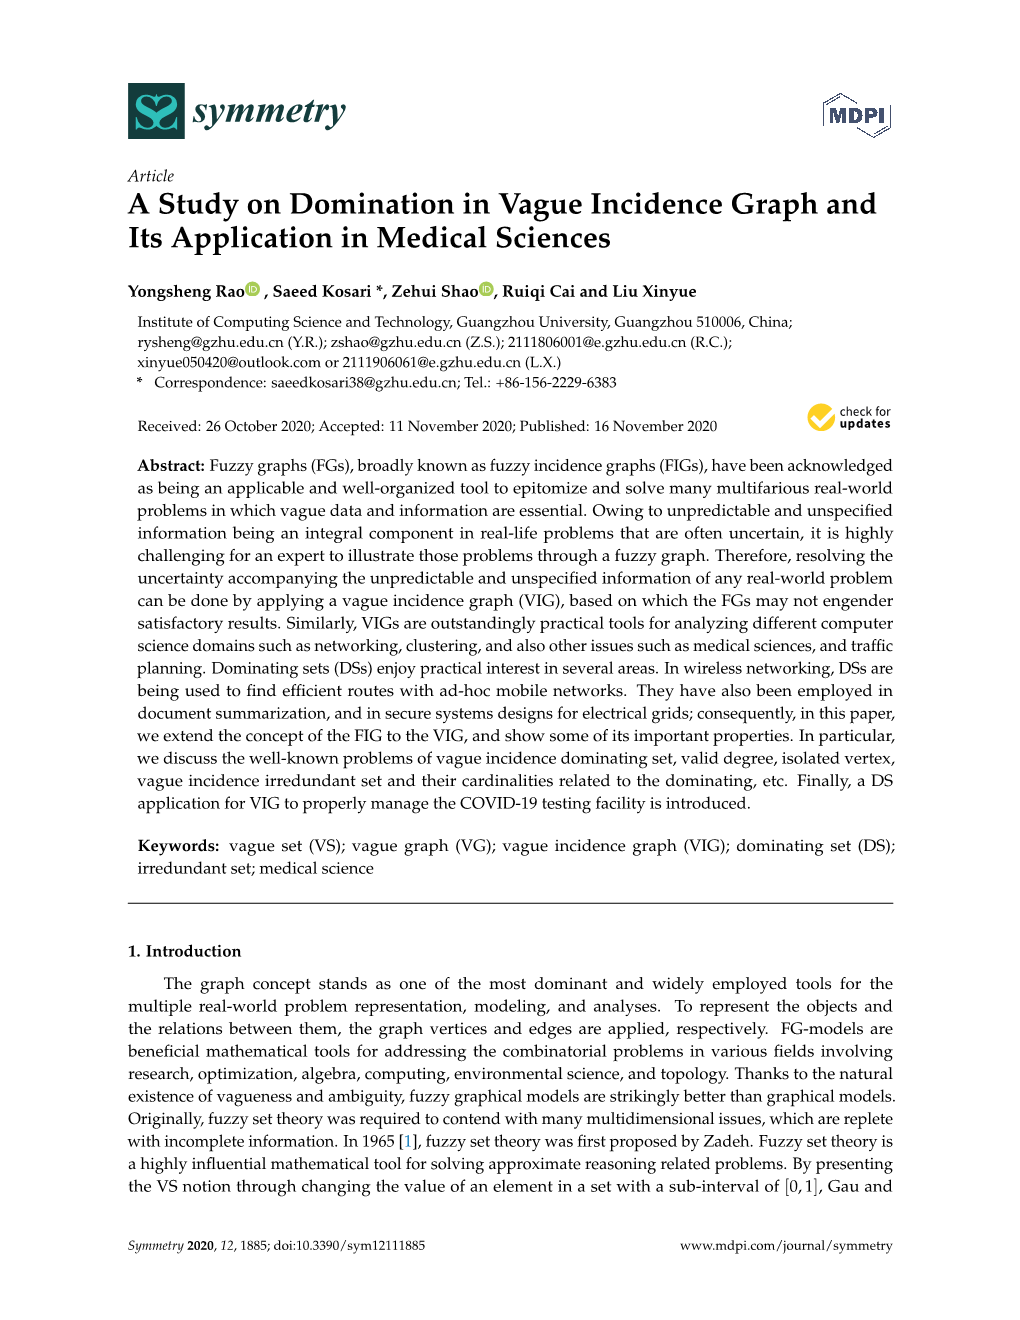 A Study on Domination in Vague Incidence Graph and Its Application in Medical Sciences